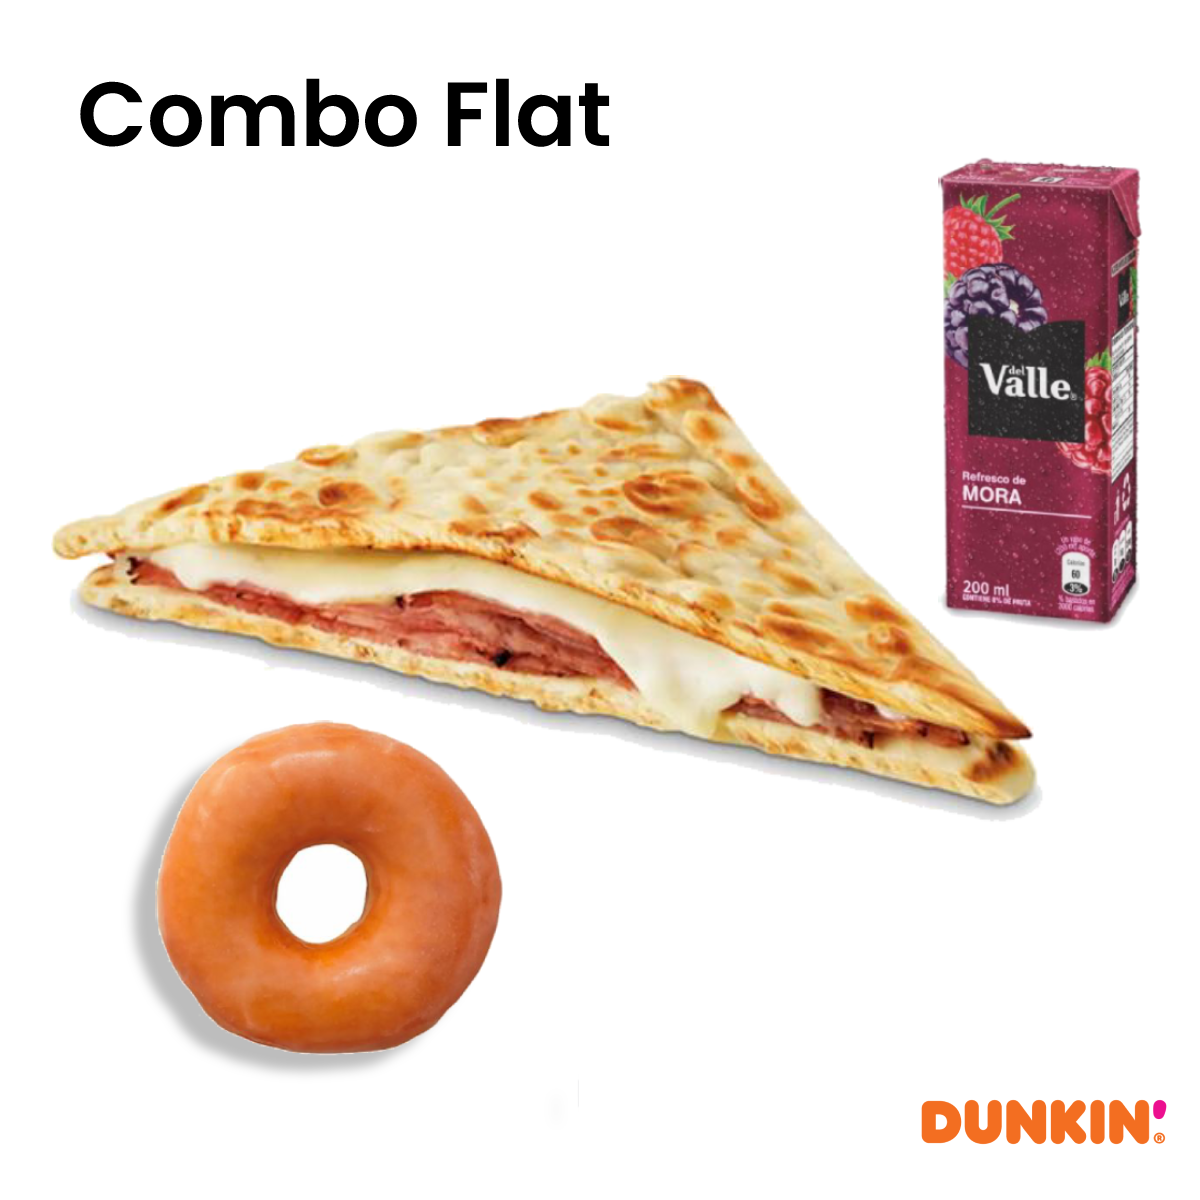 Combo Flat: Flat + Donut pequeña + Jugo del Valle - Dunkin Donuts